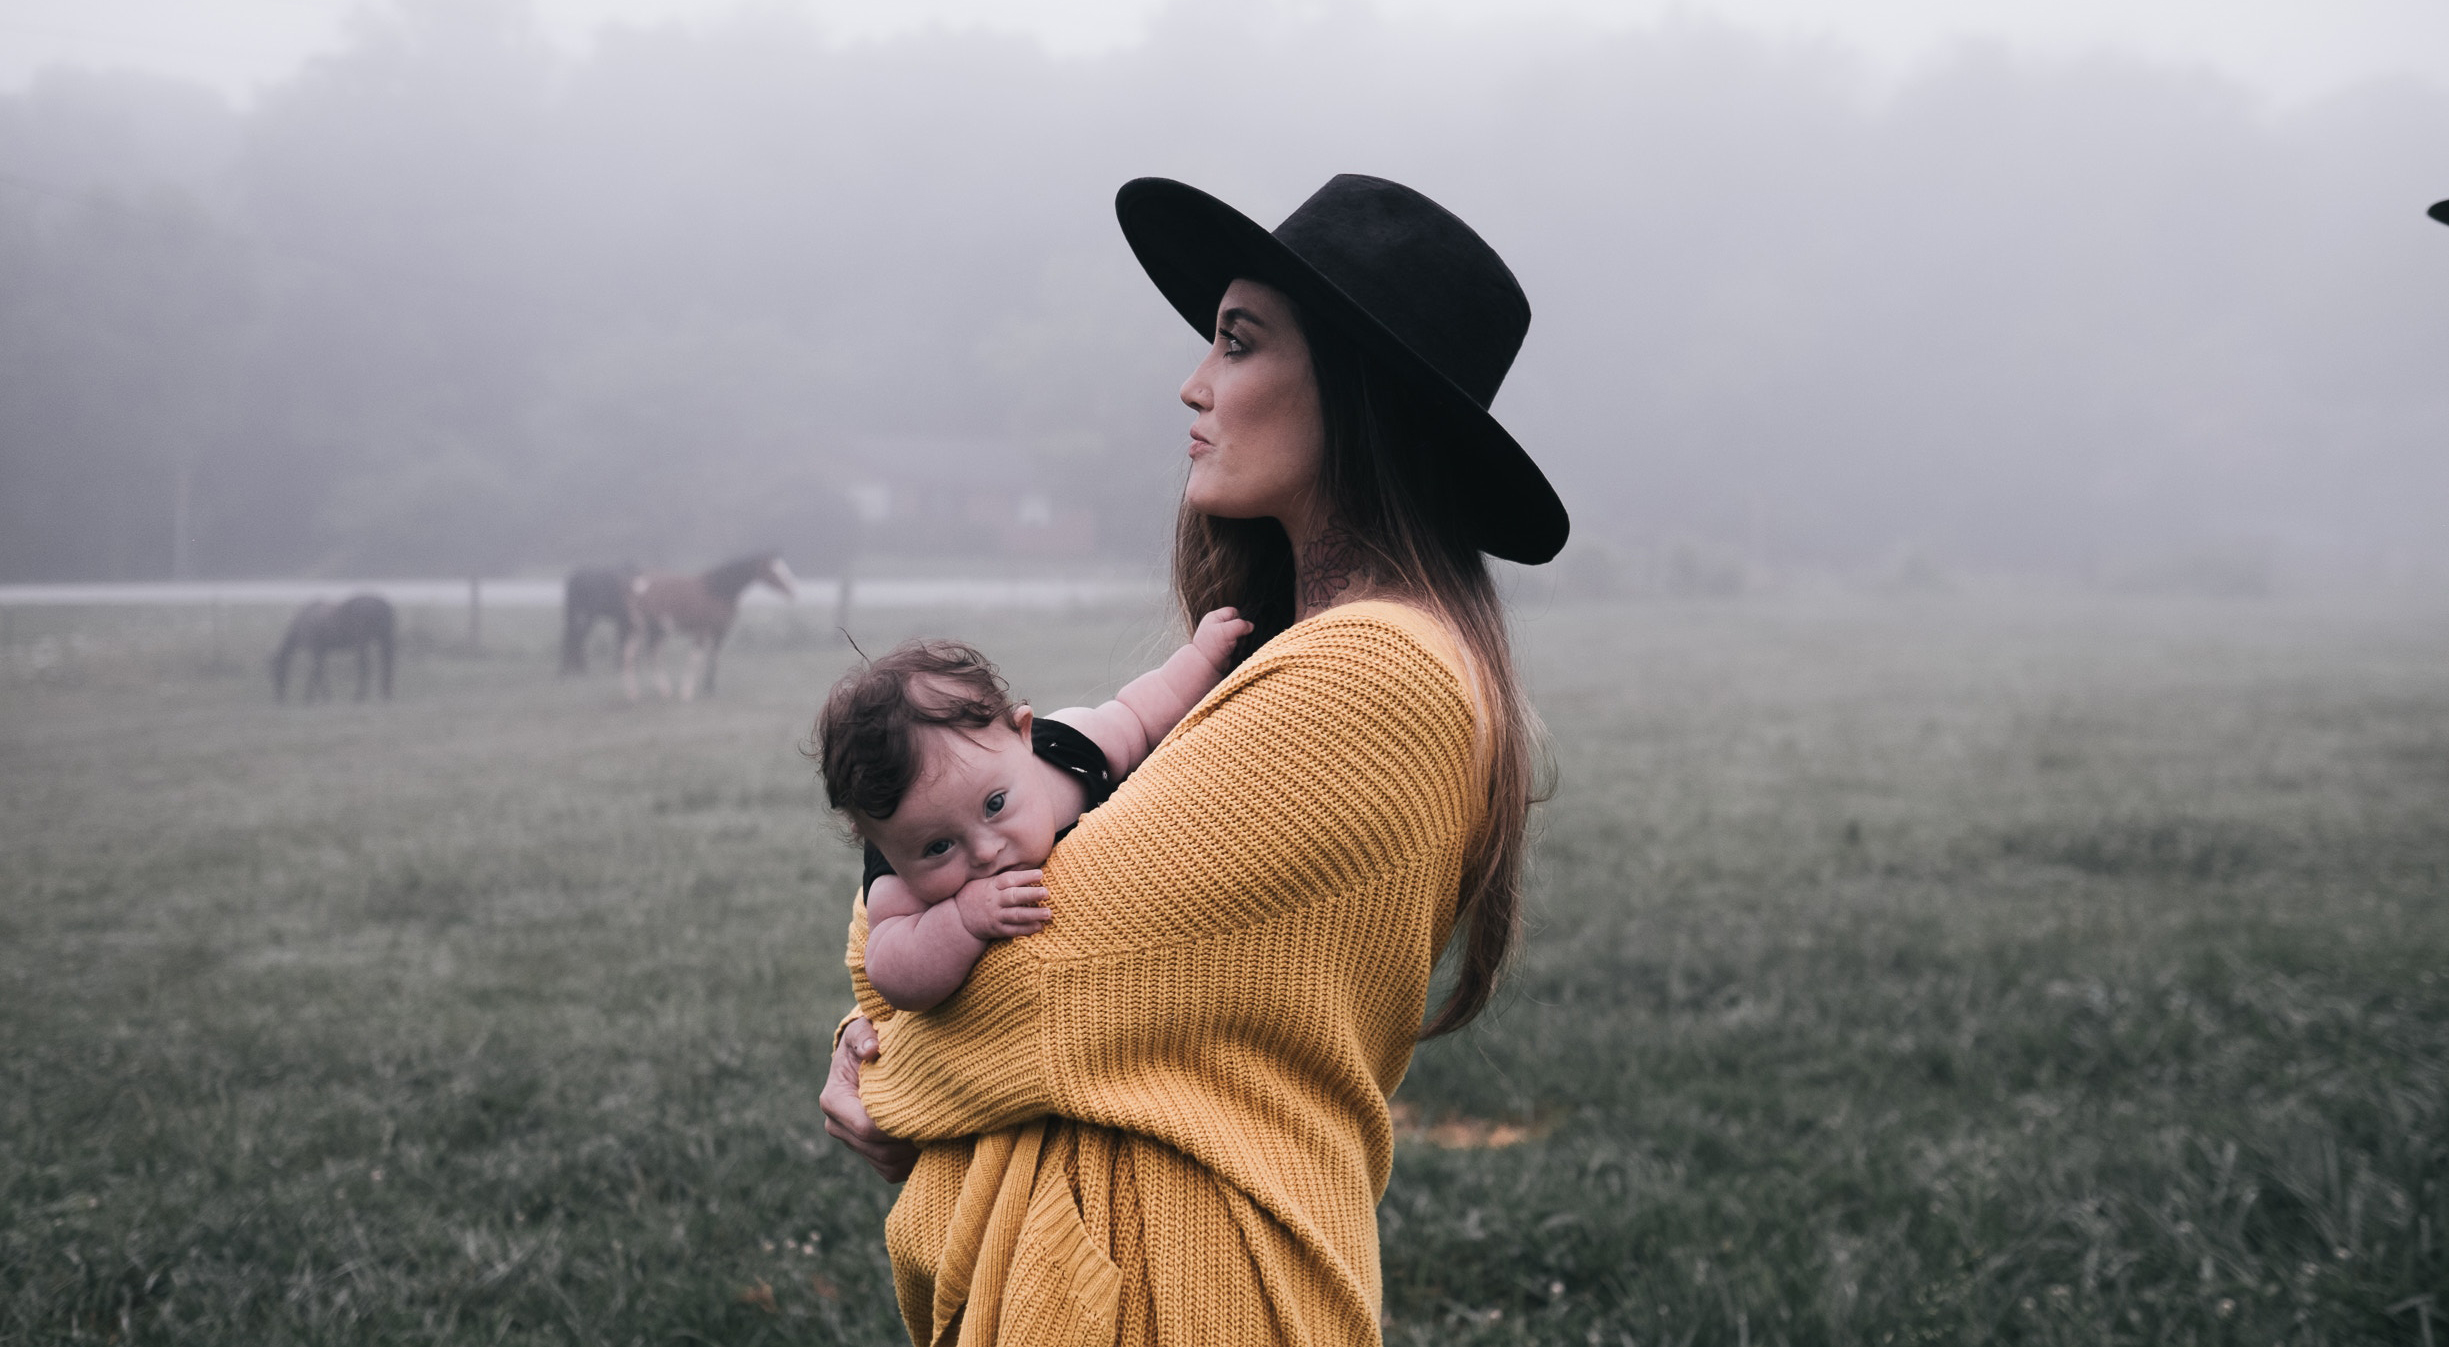 Signs of Burnout Contraception Options After Pregnancy Mum holding baby with horses in background